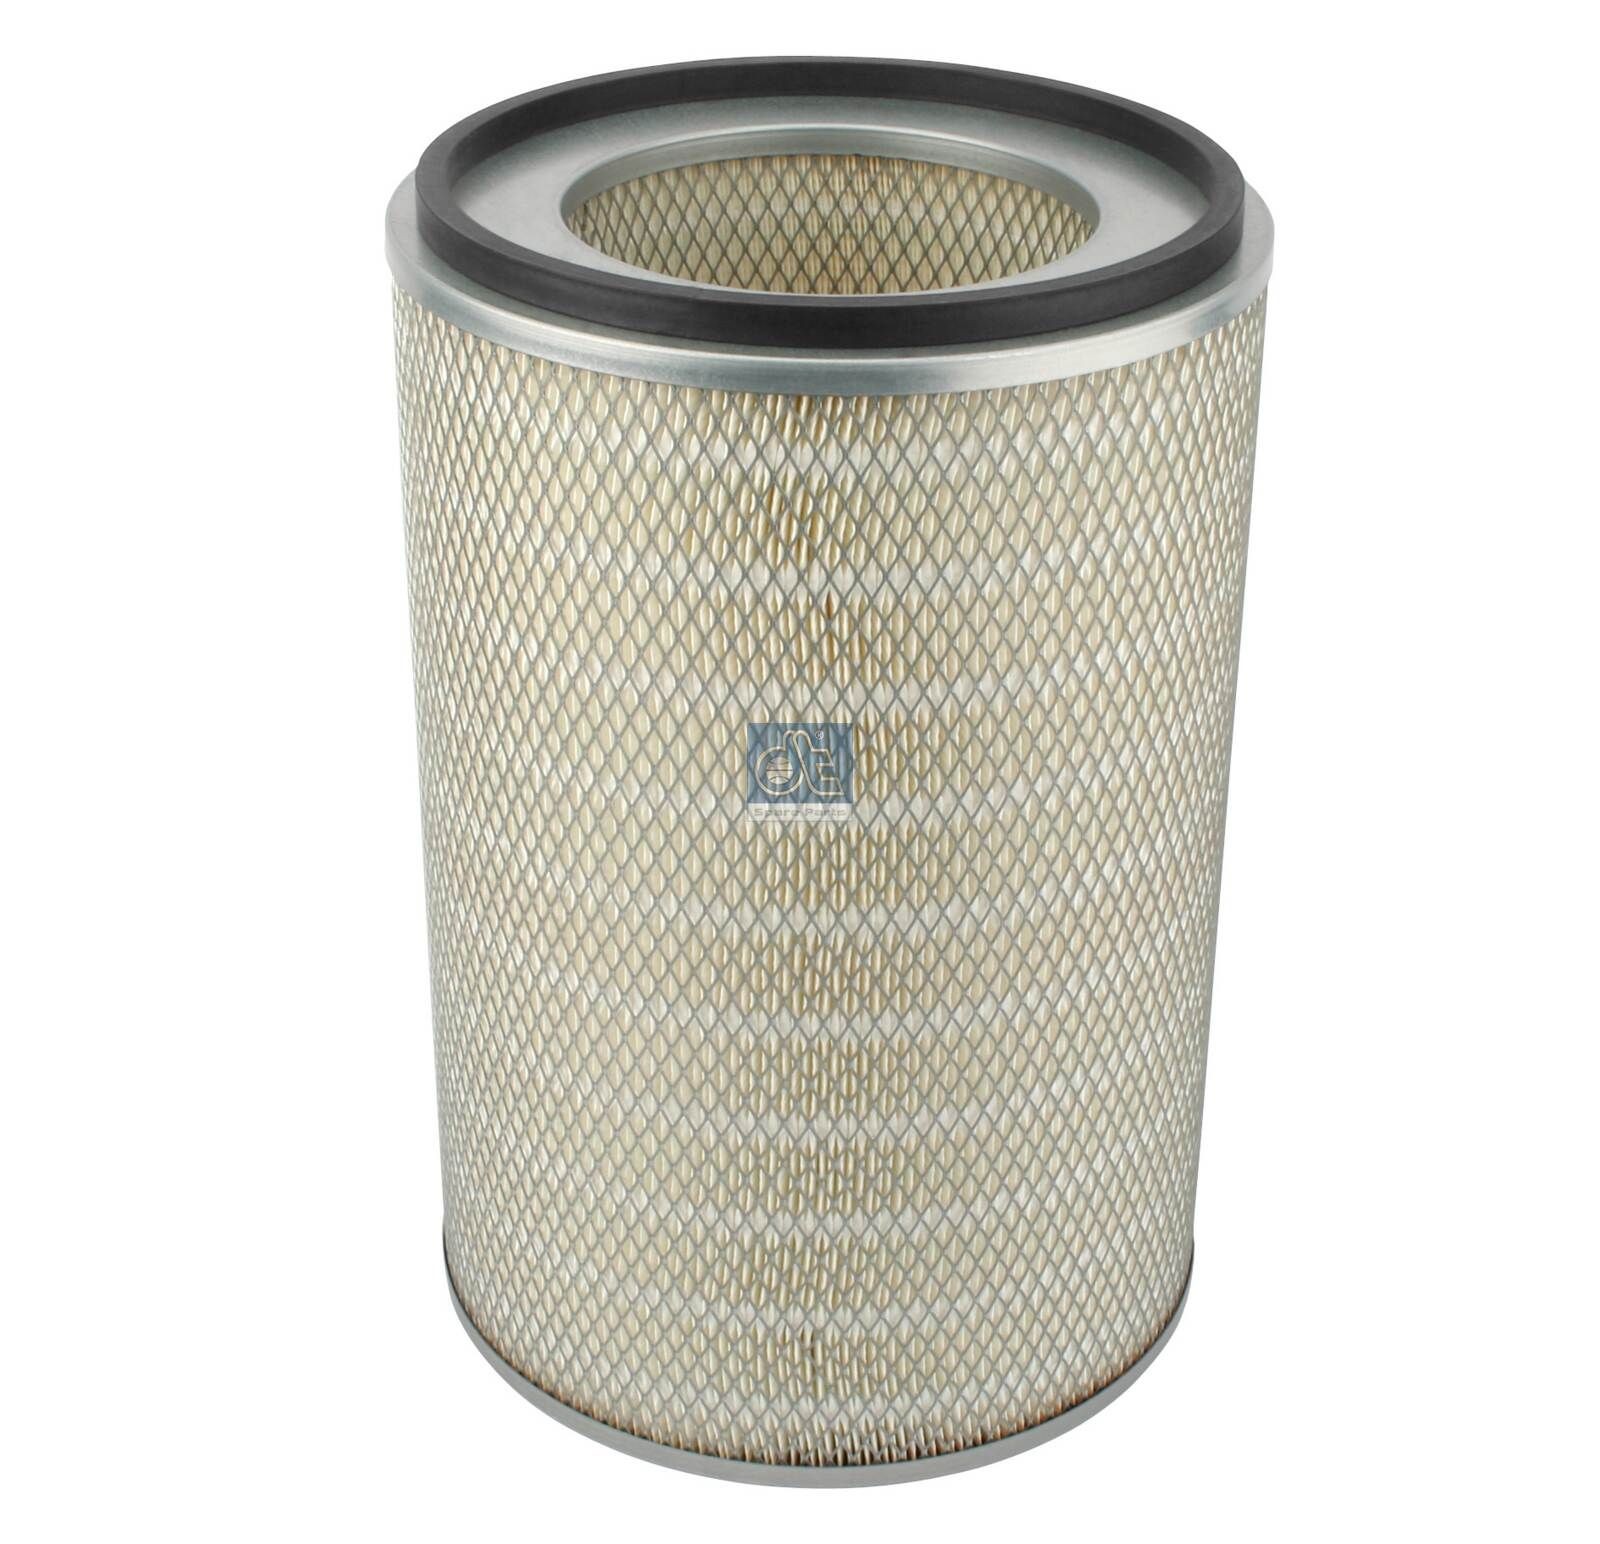 DT Spare Parts 419mm, 282mm, Filter Insert Height: 419mm Engine air filter 6.25012 buy